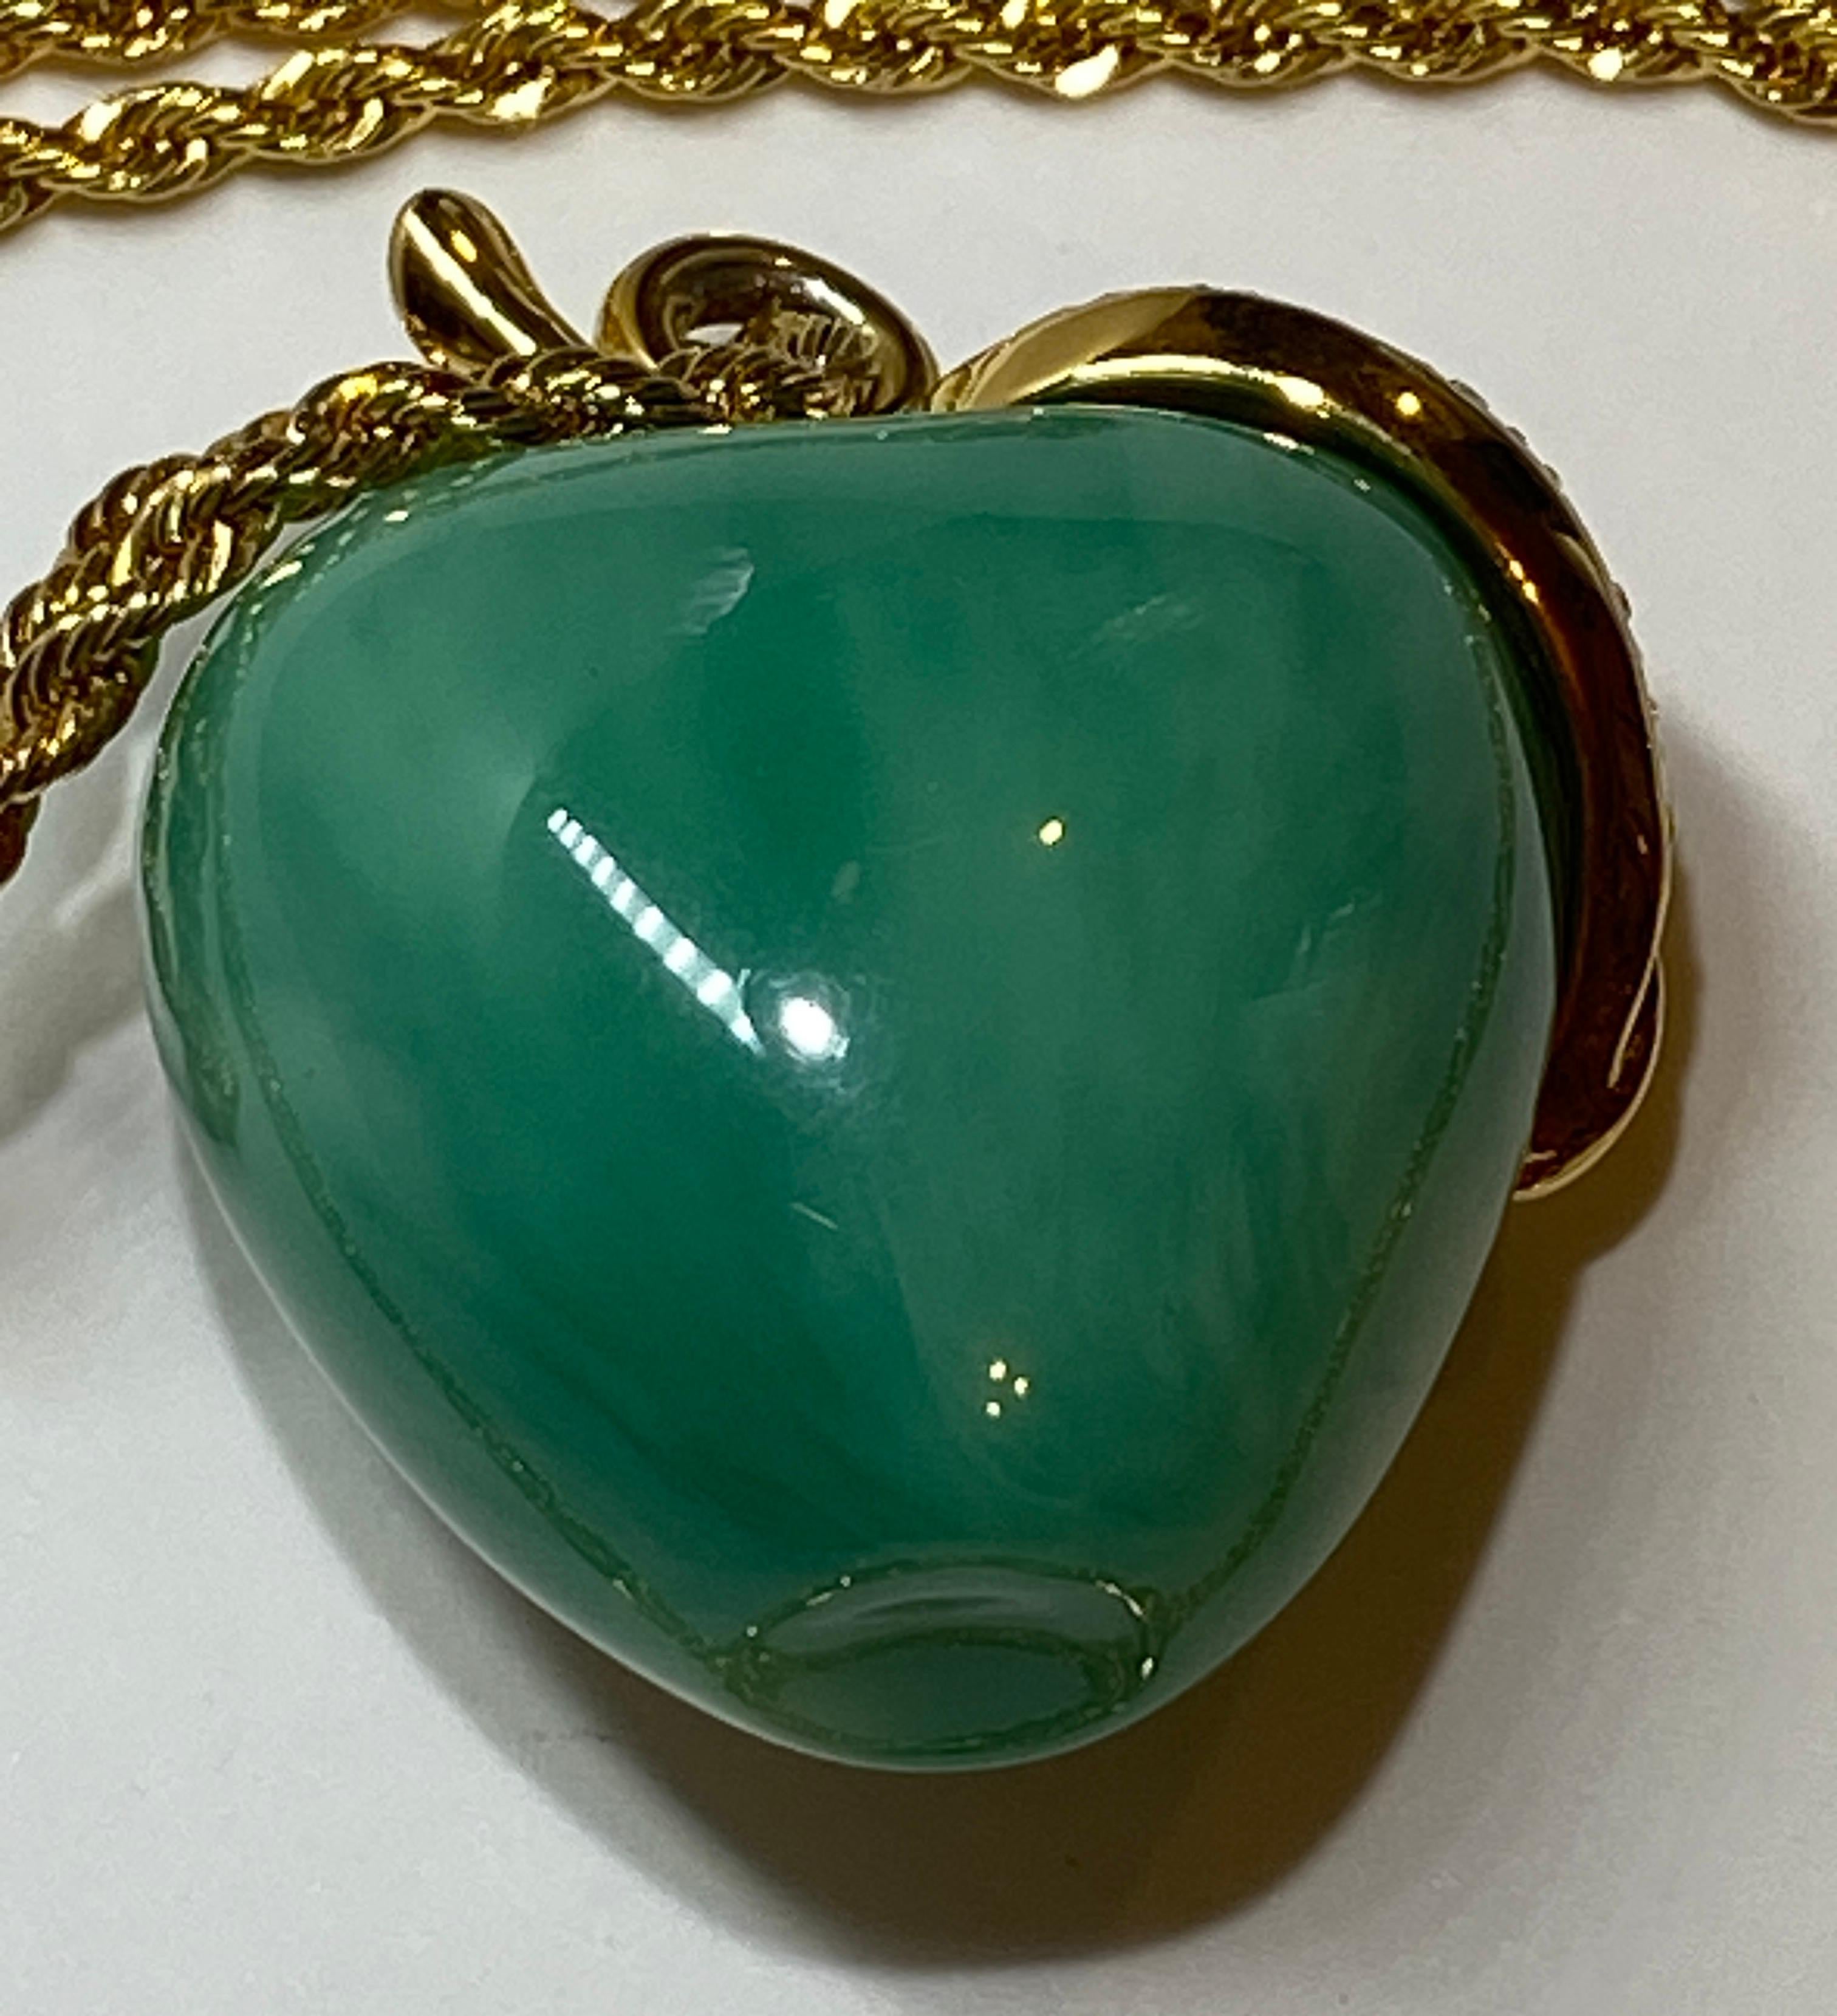 Kenneth Jay Lane Whimsical Rhinestone Jade-Green Lucite Apple Pendant & Necklace For Sale 2